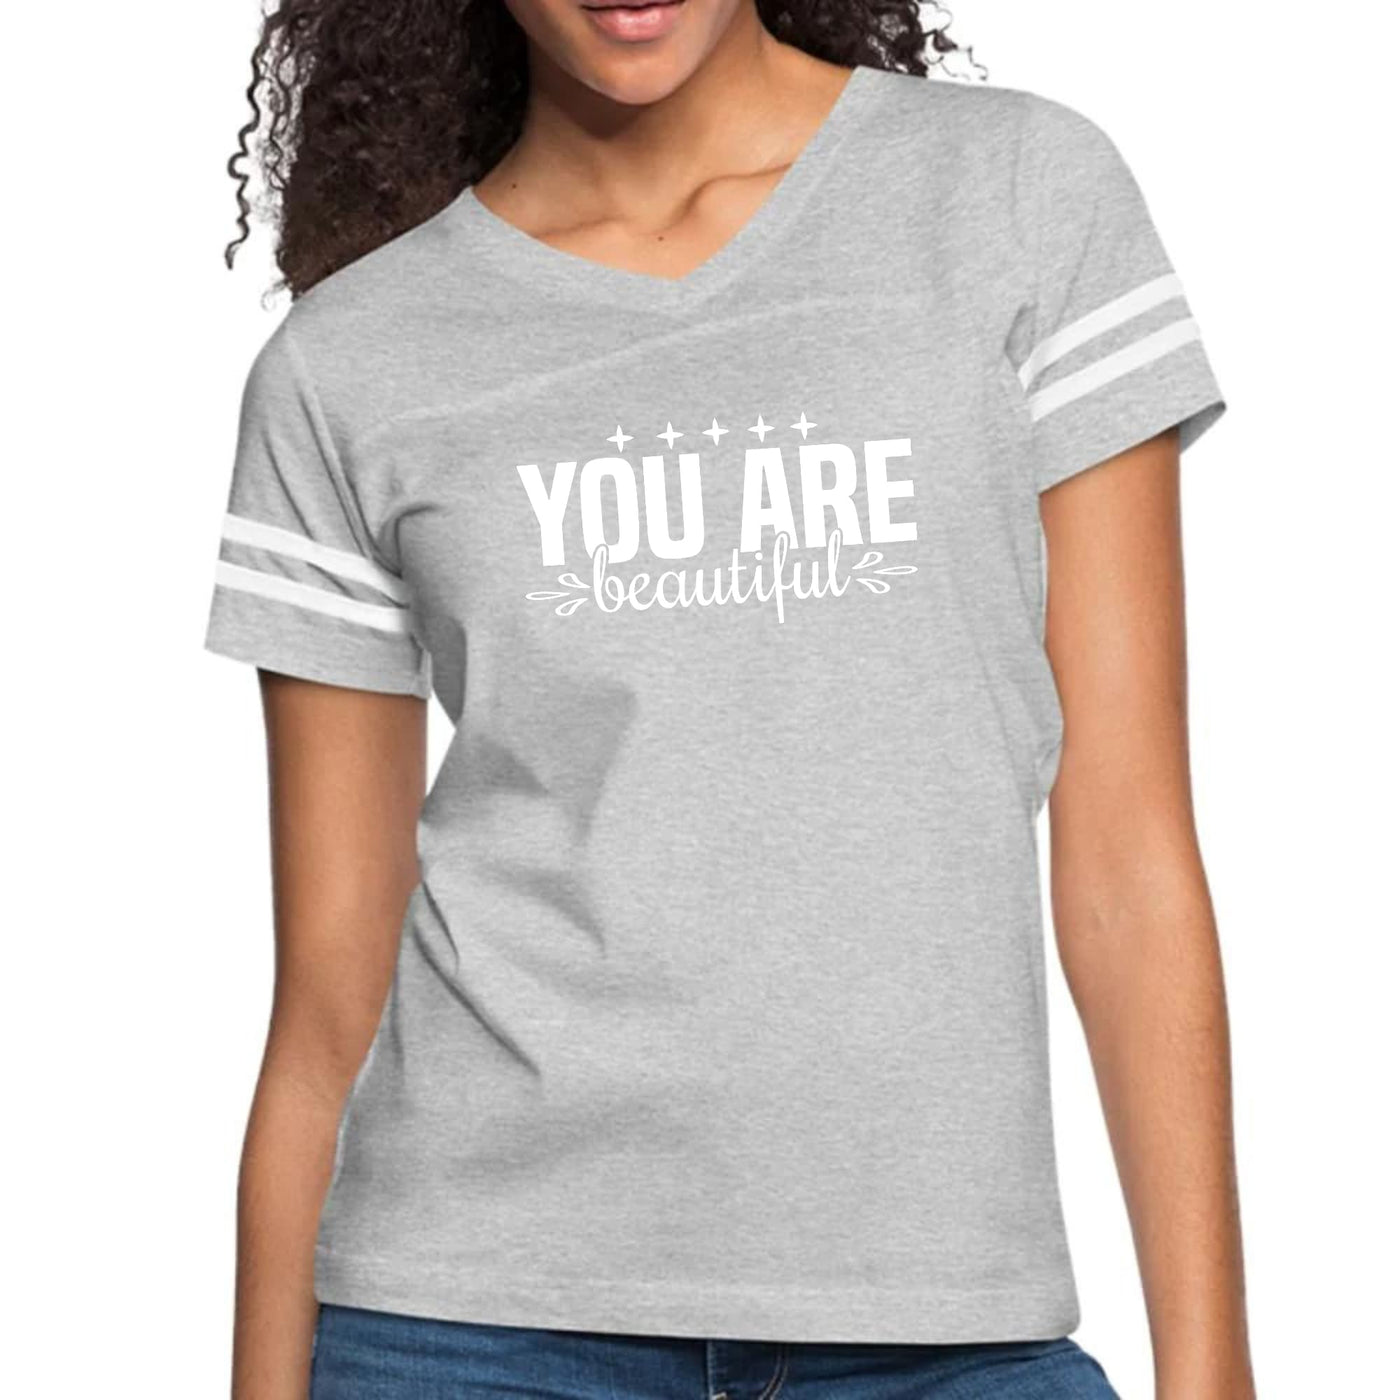 Womens Vintage Sport Graphic T-shirt You Are Beautiful Inspiration - Womens